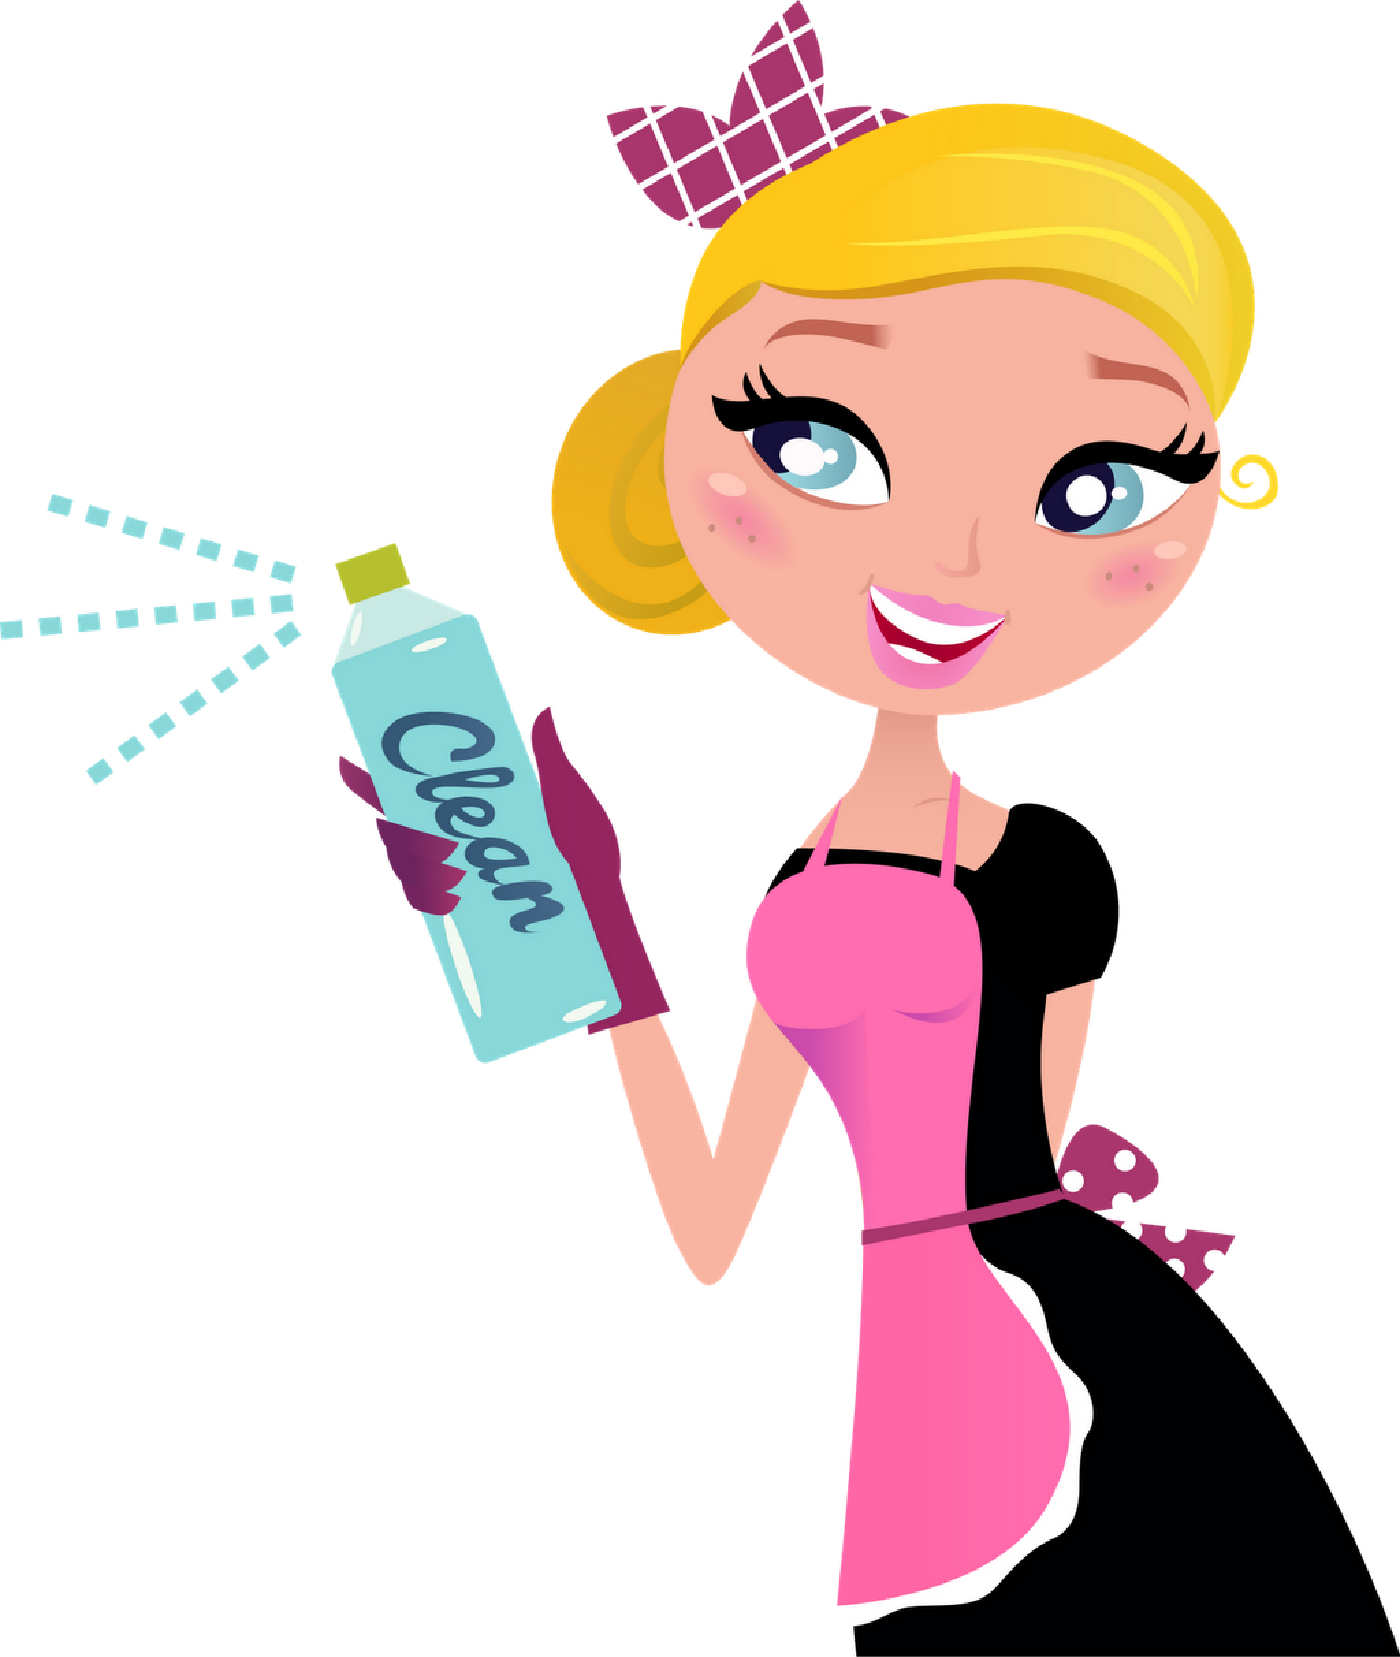 House Cleaning - Cleaning Maid Clipart (1400x1657)